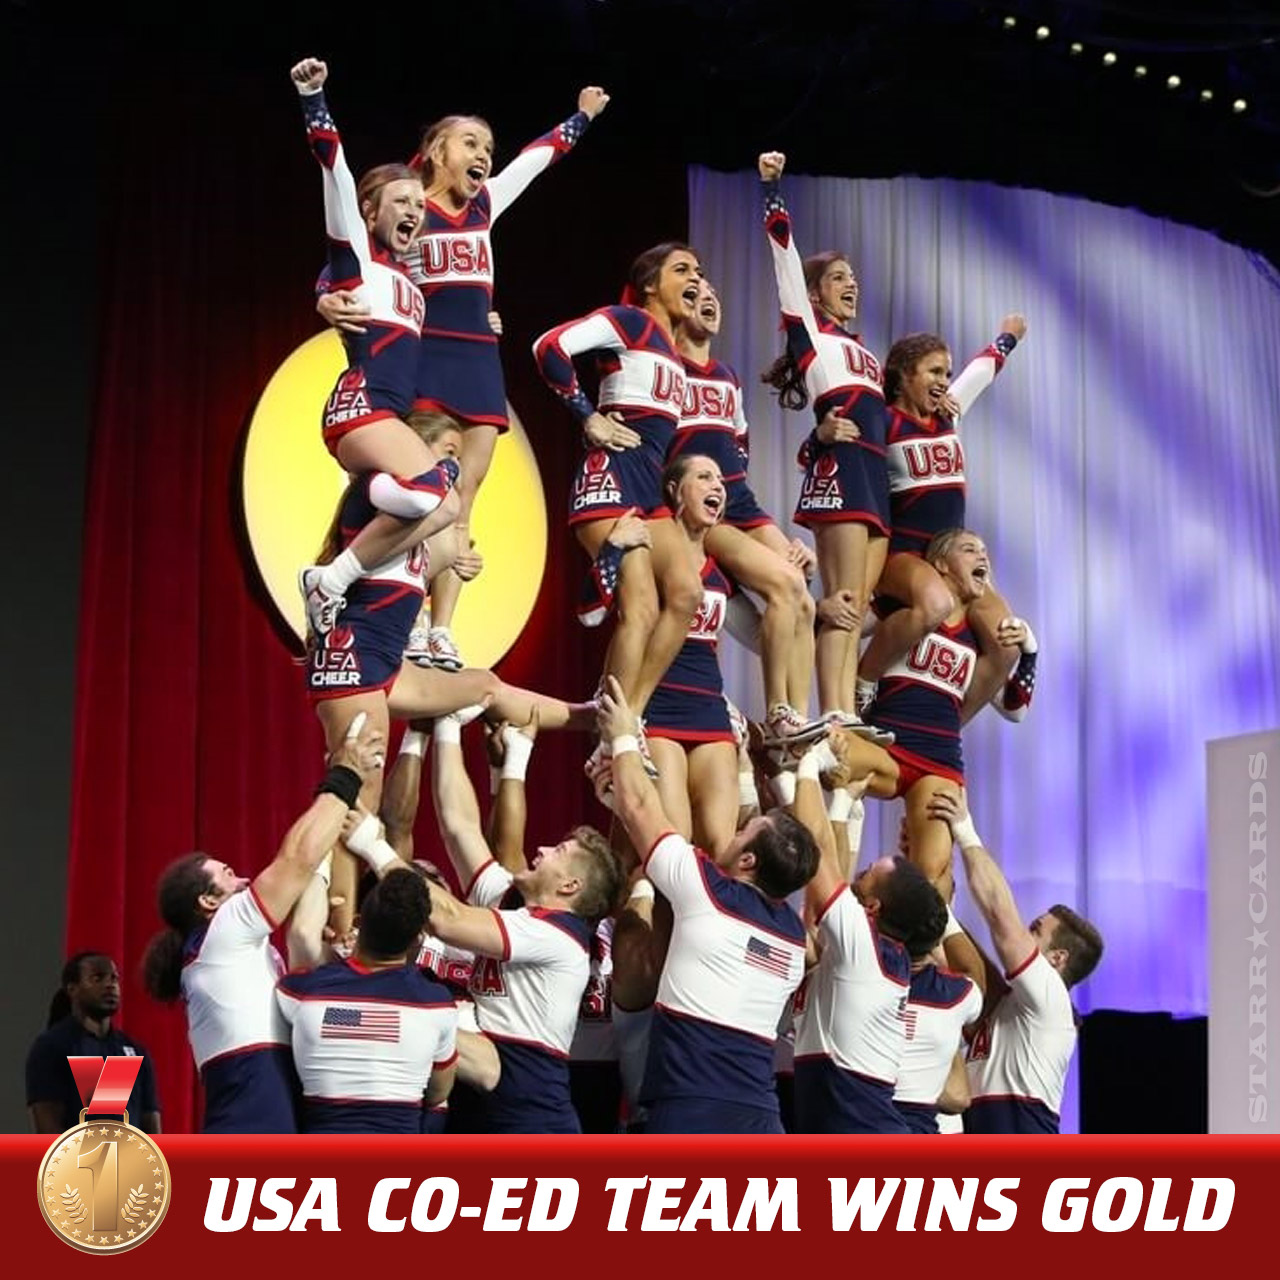 Watch every gold medal performance from 2017 ICU Worlds